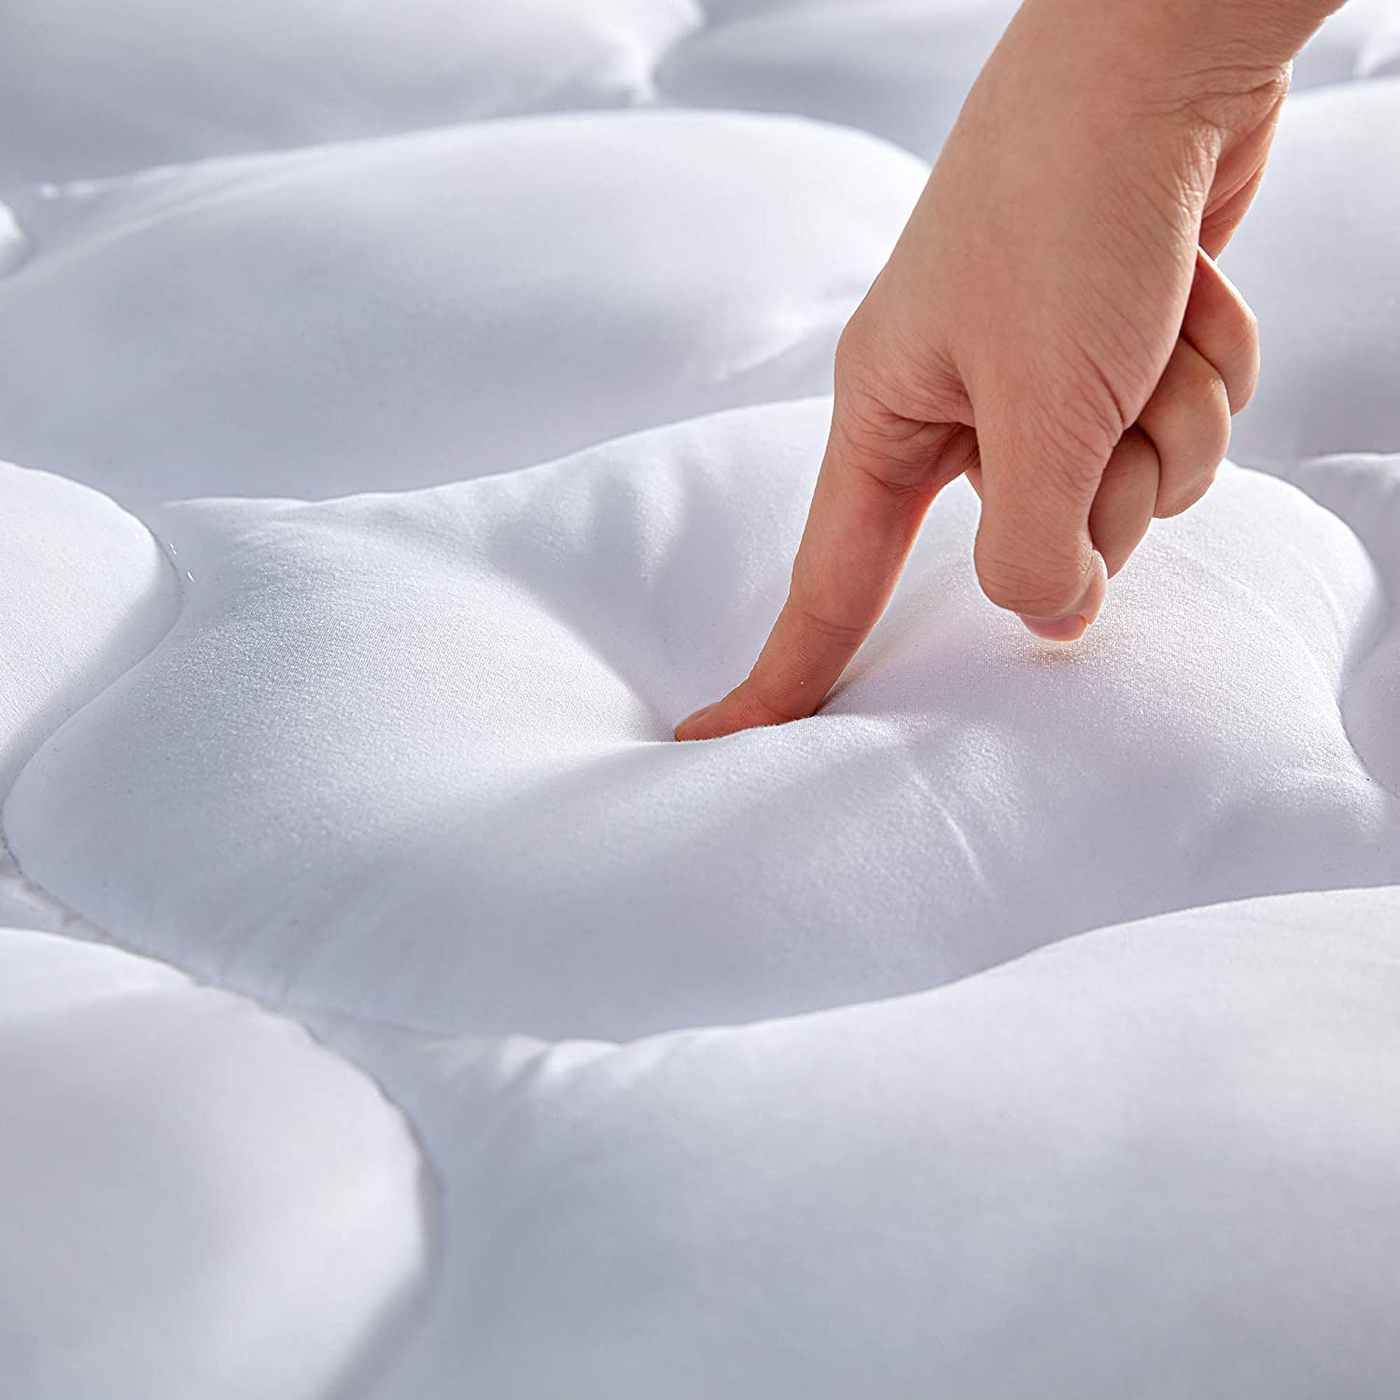 SLEEP ZONE Quilted Mattress Pad Cover - Extra Thick Soft Fluffy Bedding Topper Pillow Top Upto 21 inch Deep Pocket, White, Full